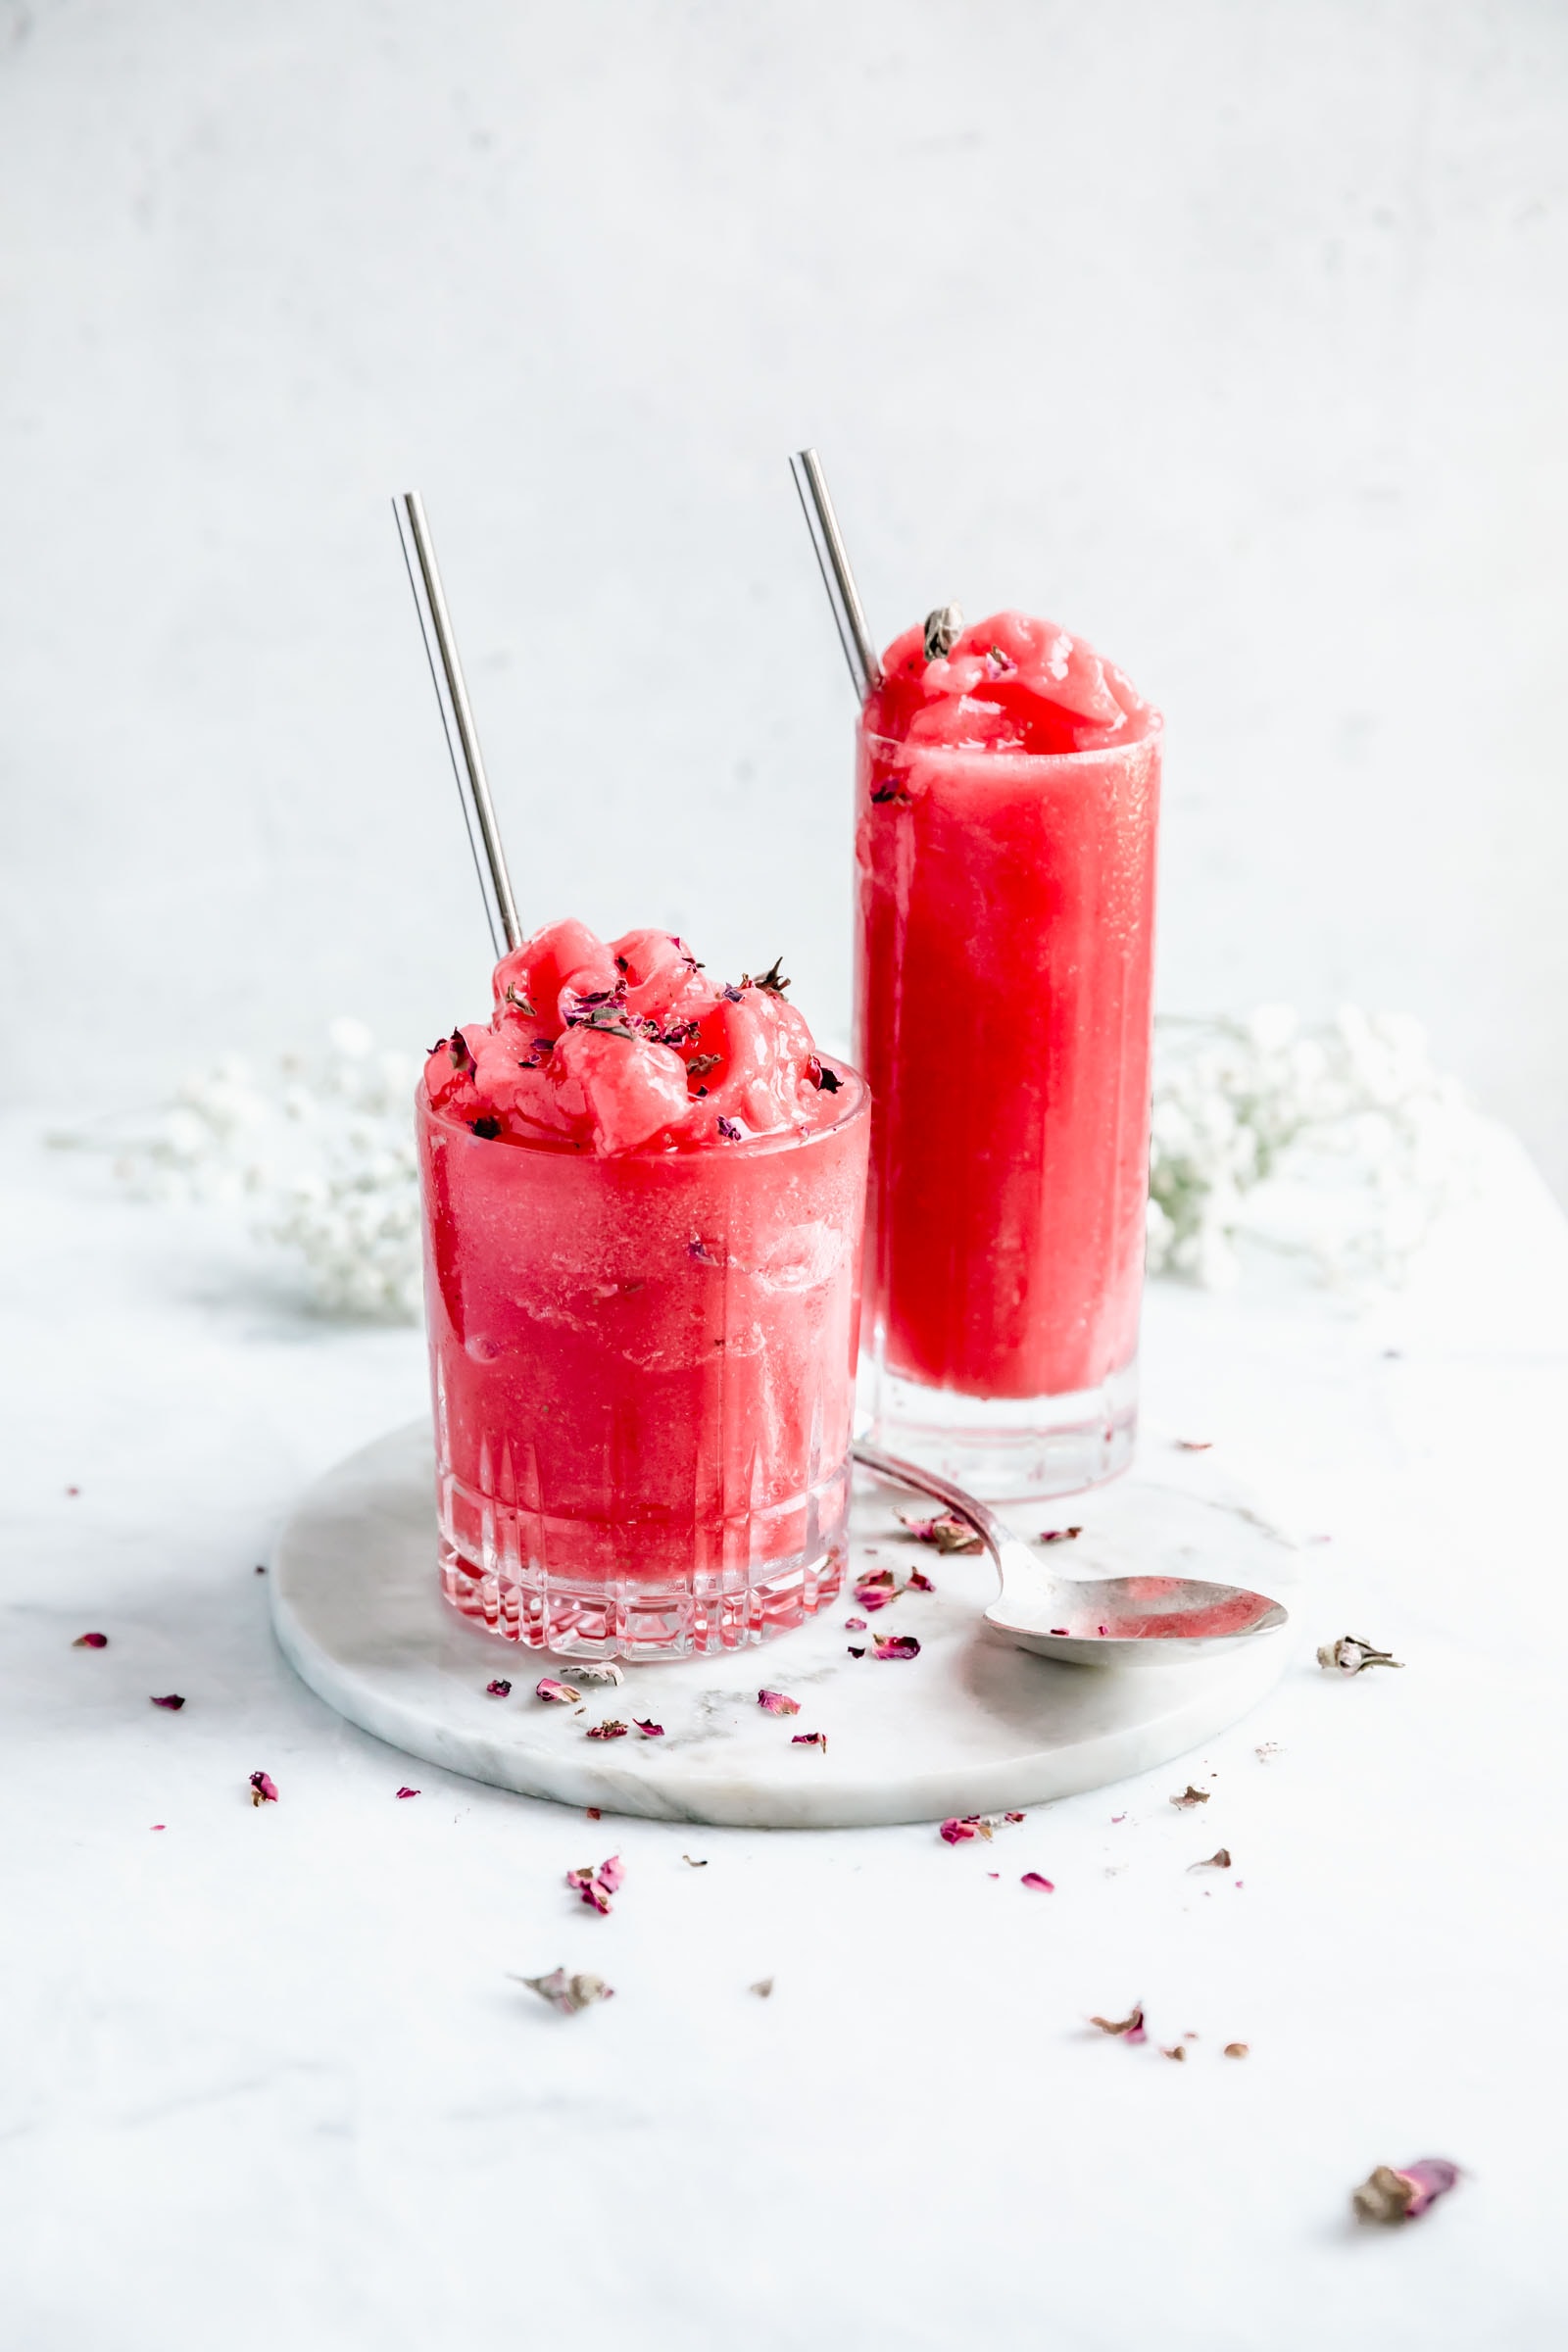 Frozen rosé aka frosé AKA your new favorite summer cocktail. Blend this recipe up with just two ingredients for a refreshing and easy drink!